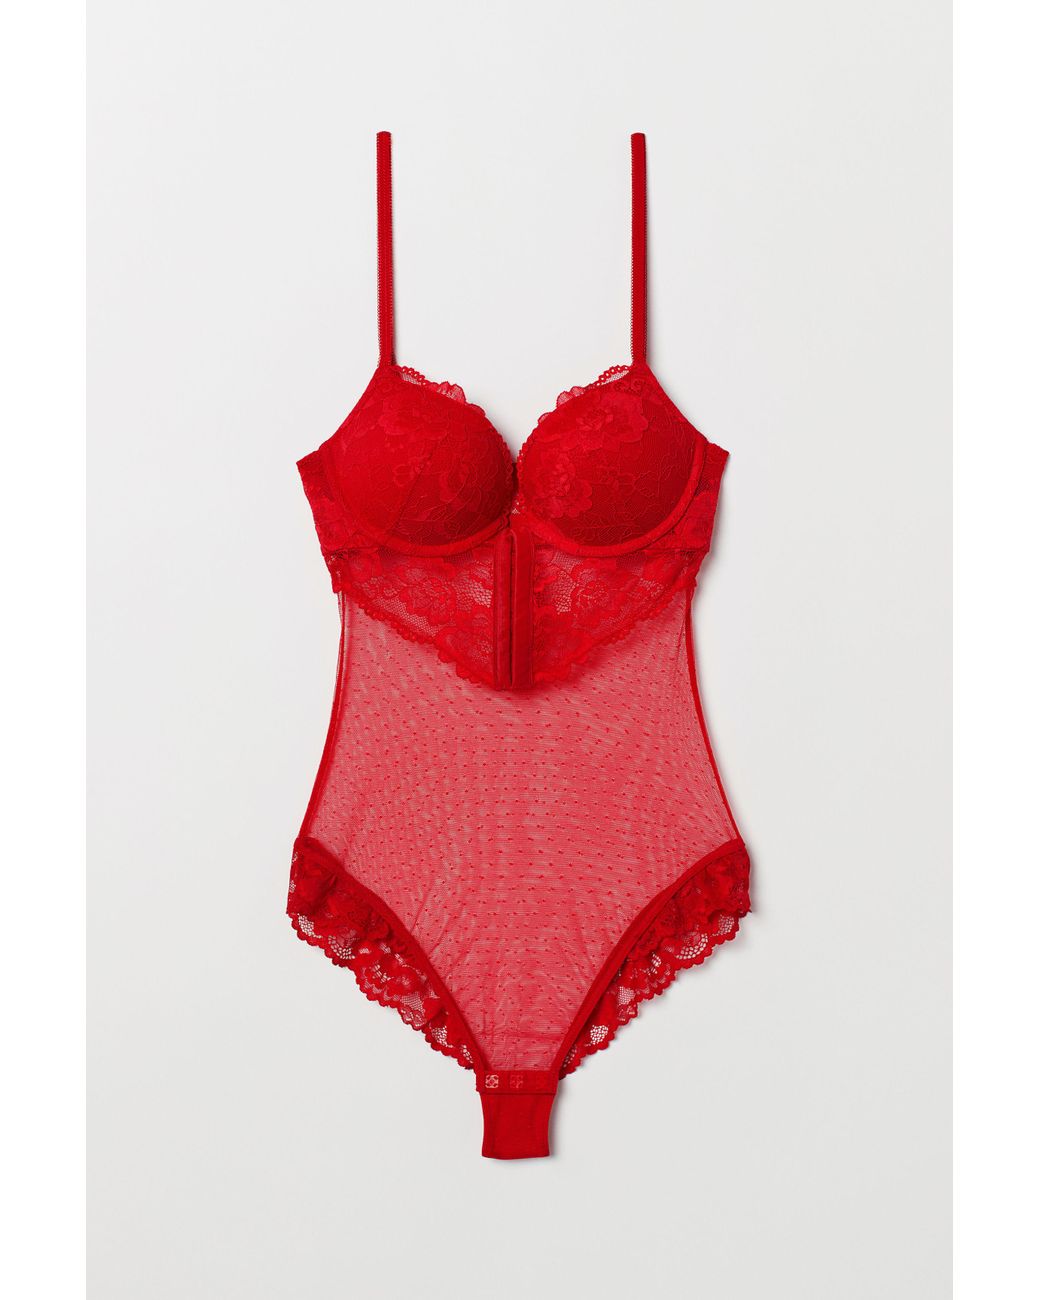 H&M Lace Super Push-up Body in Red | Lyst